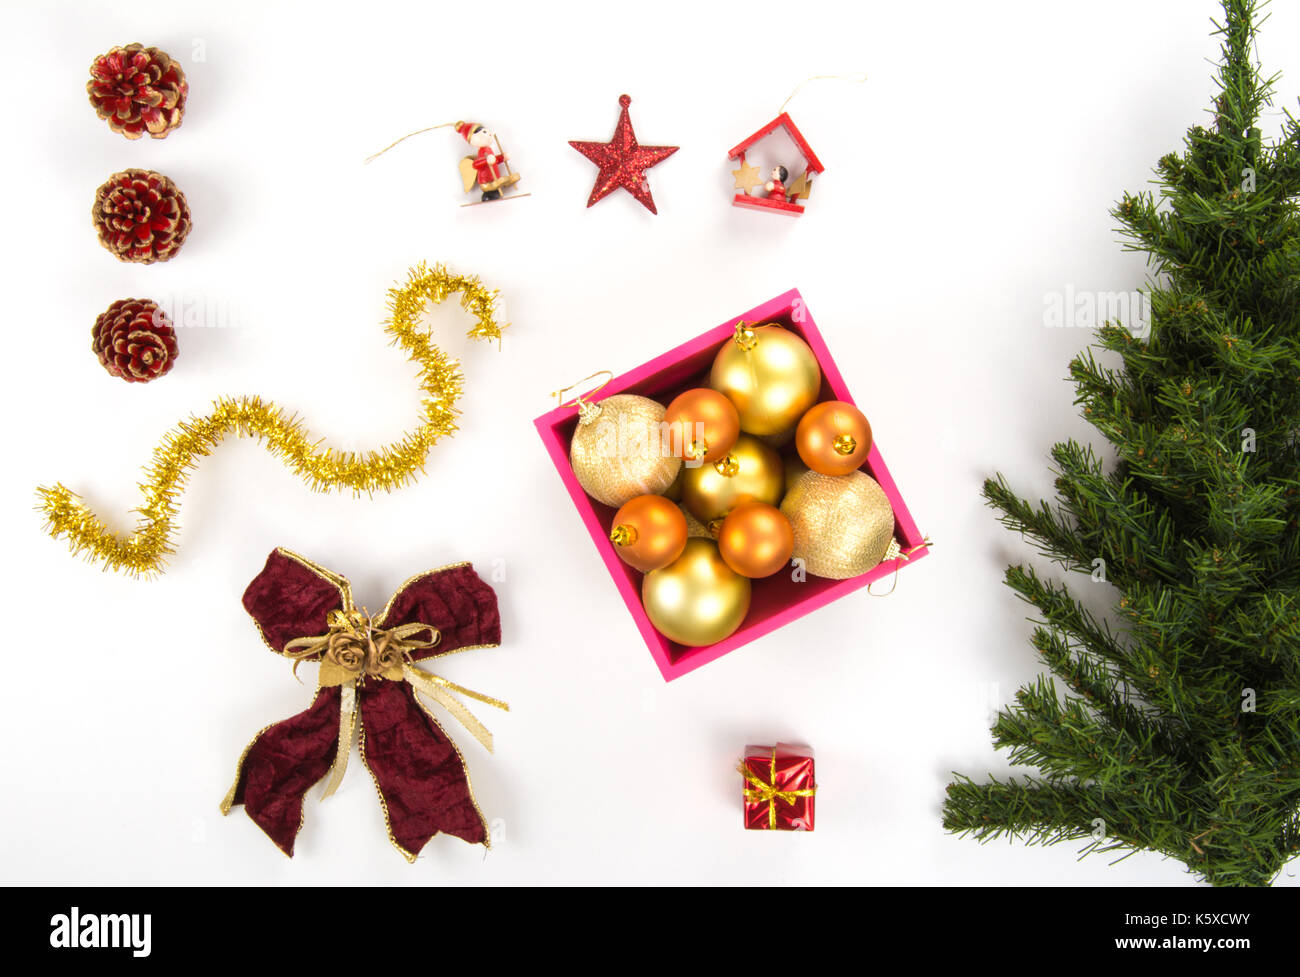 High angle view of a collection of Christmas ornaments and a plastic pine tree on a white background Stock Photo